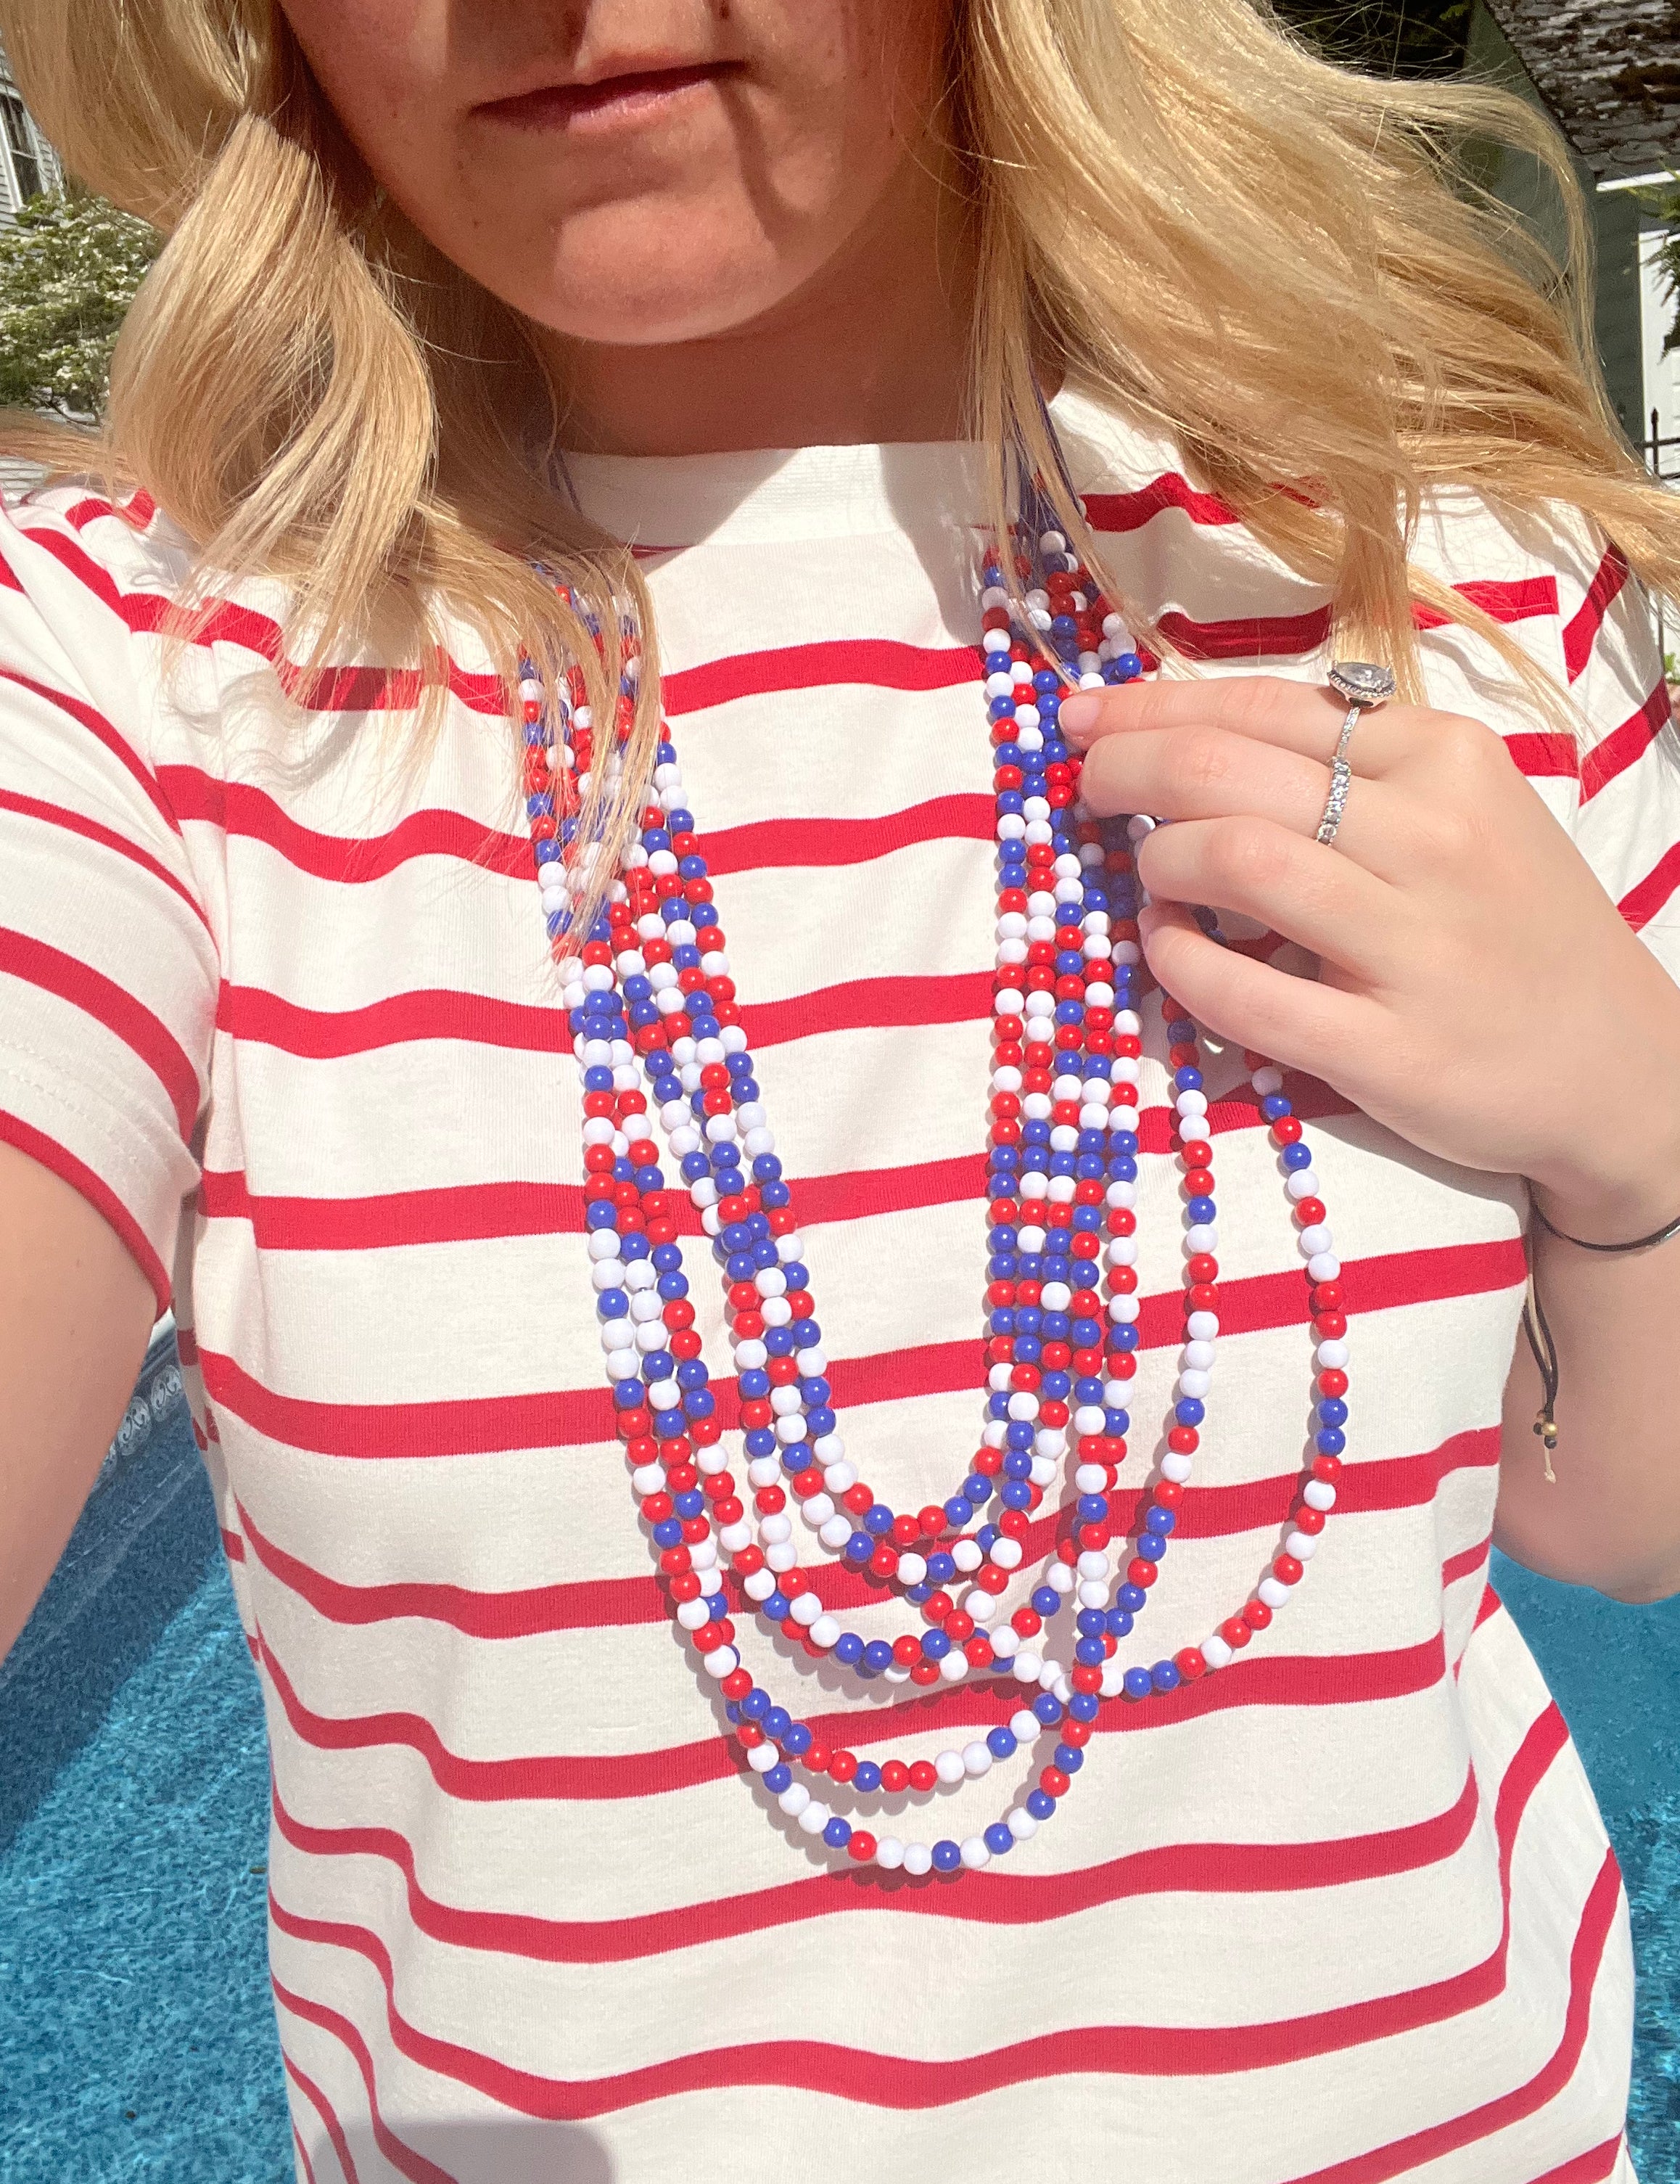 Layered With Freedom Necklace